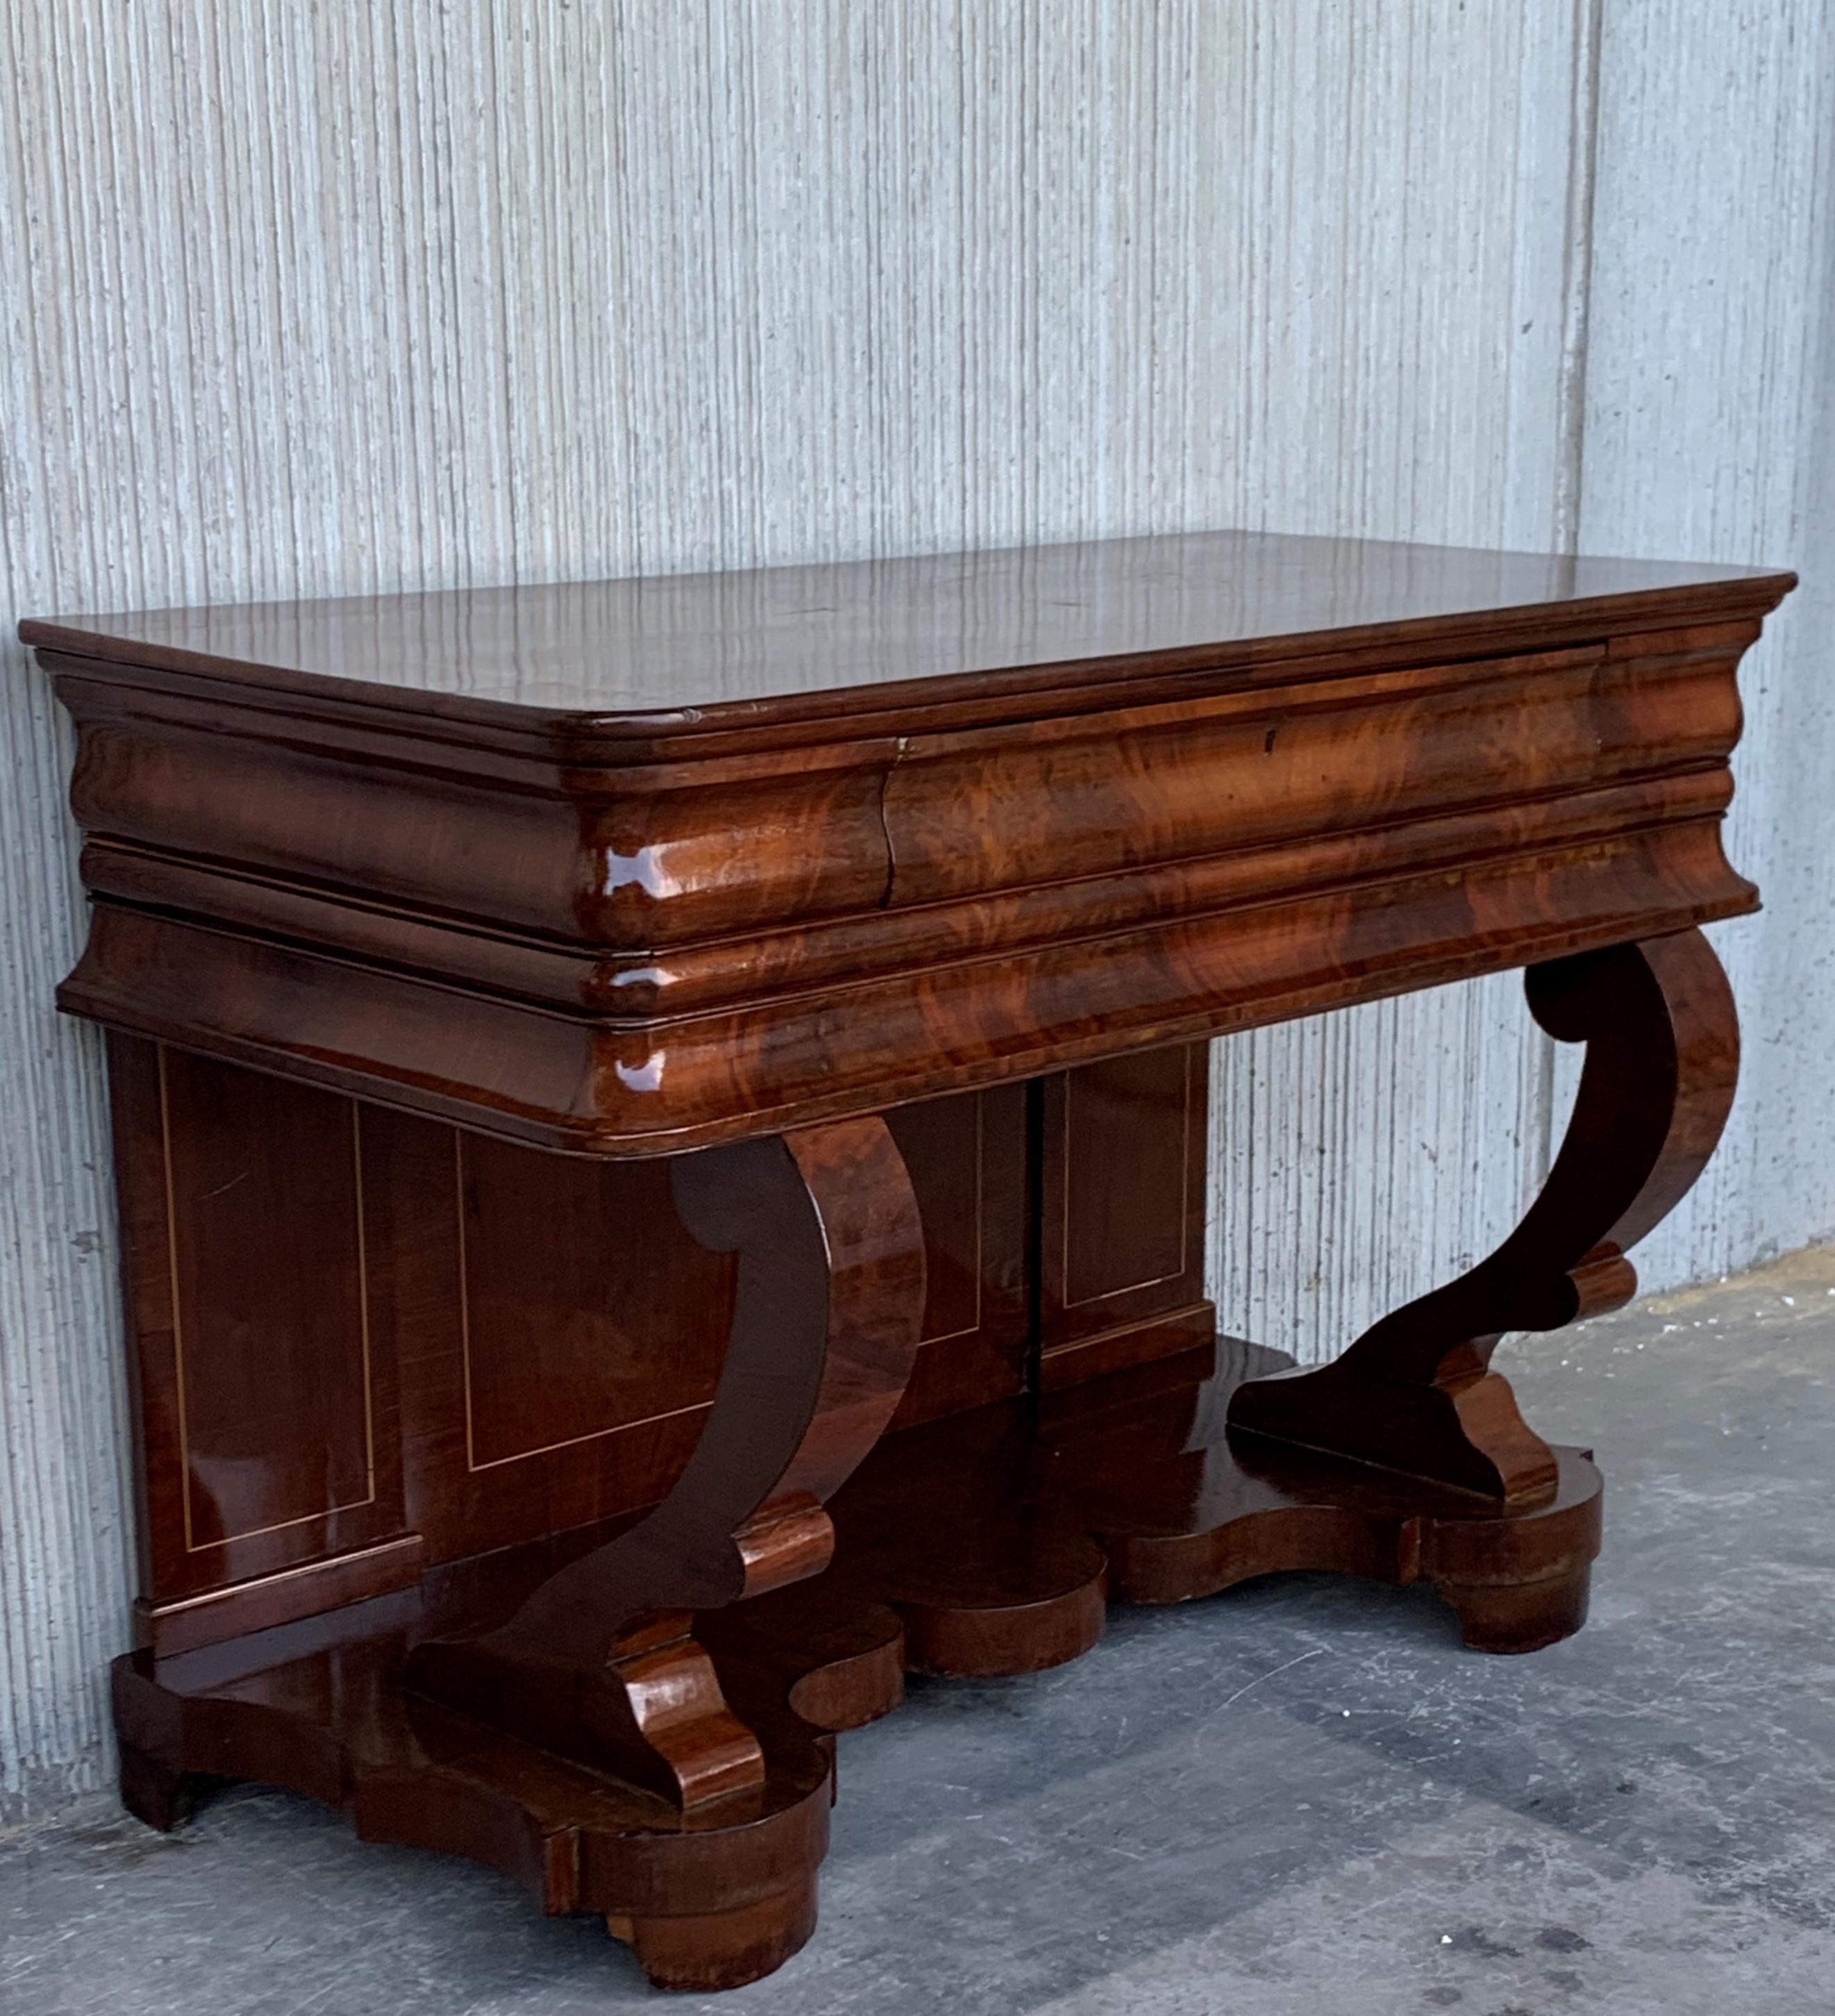 Absolute unique walnut wall console table artfully made in the early Biedermeier period circa 1830 in Austria. Made with finest walnut veneer, this rare console table features a hidden drawer and impresses with its fantastic processed S-shaped legs.